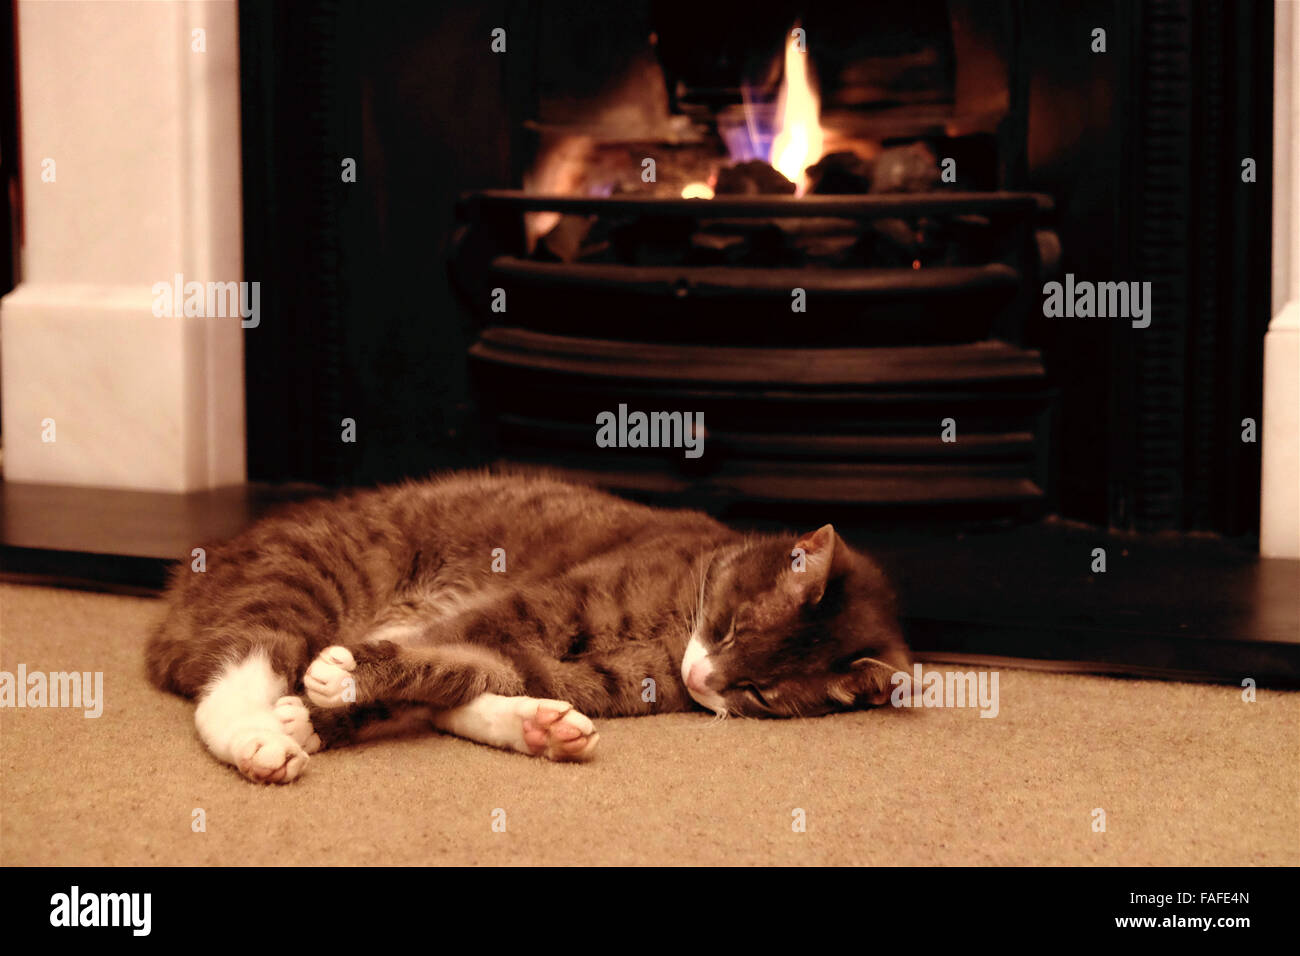 Cat sleeping by a fireplace Stock Photo